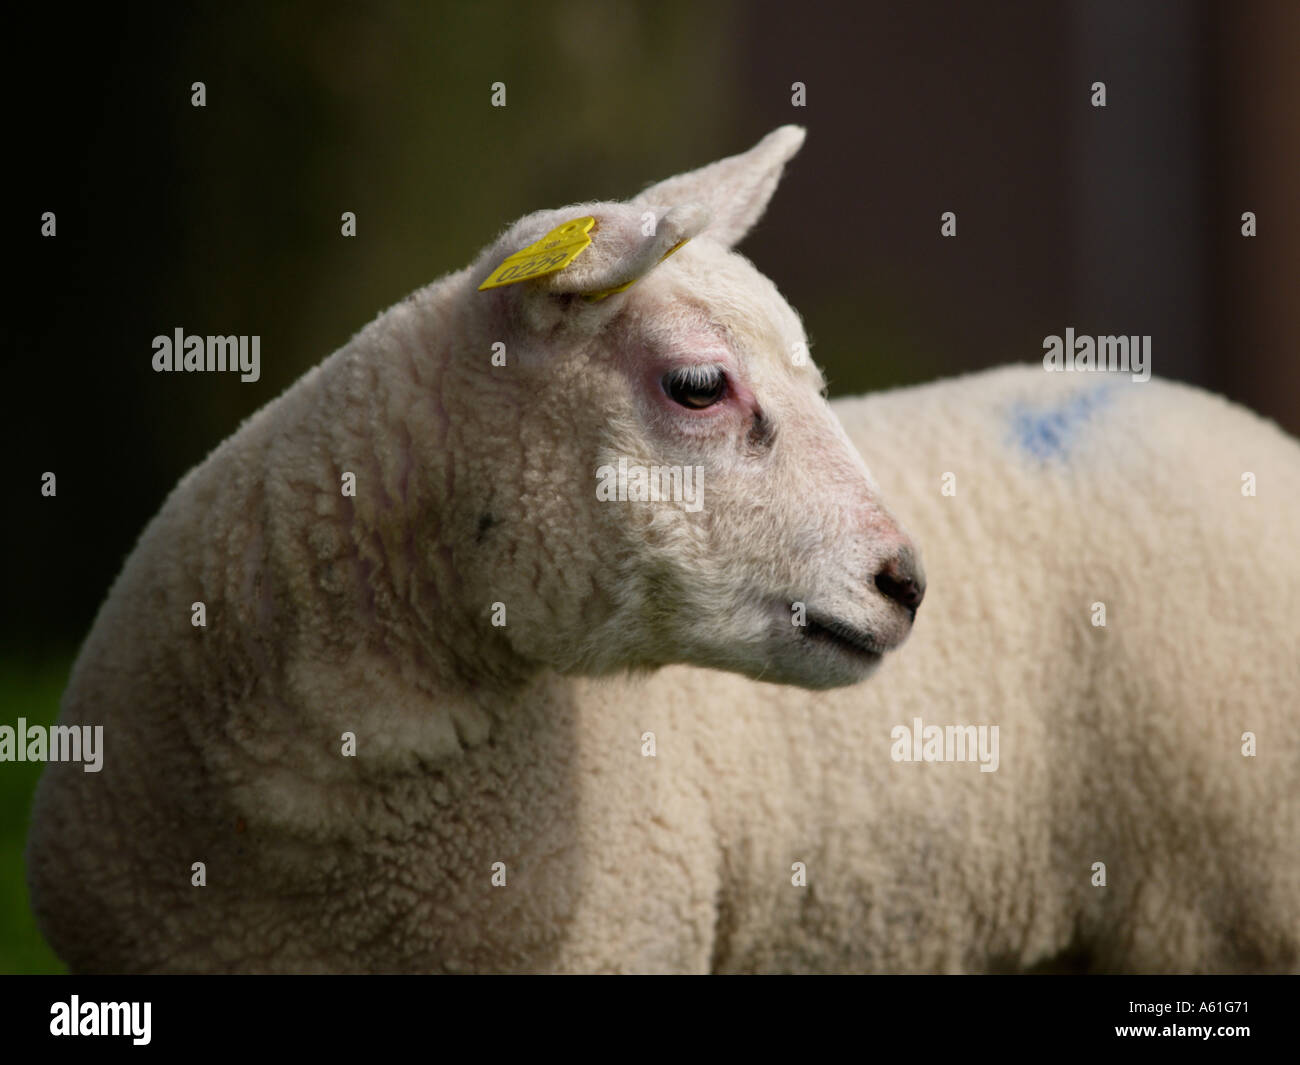 side view of young cute woolly lambs head Stock Photo